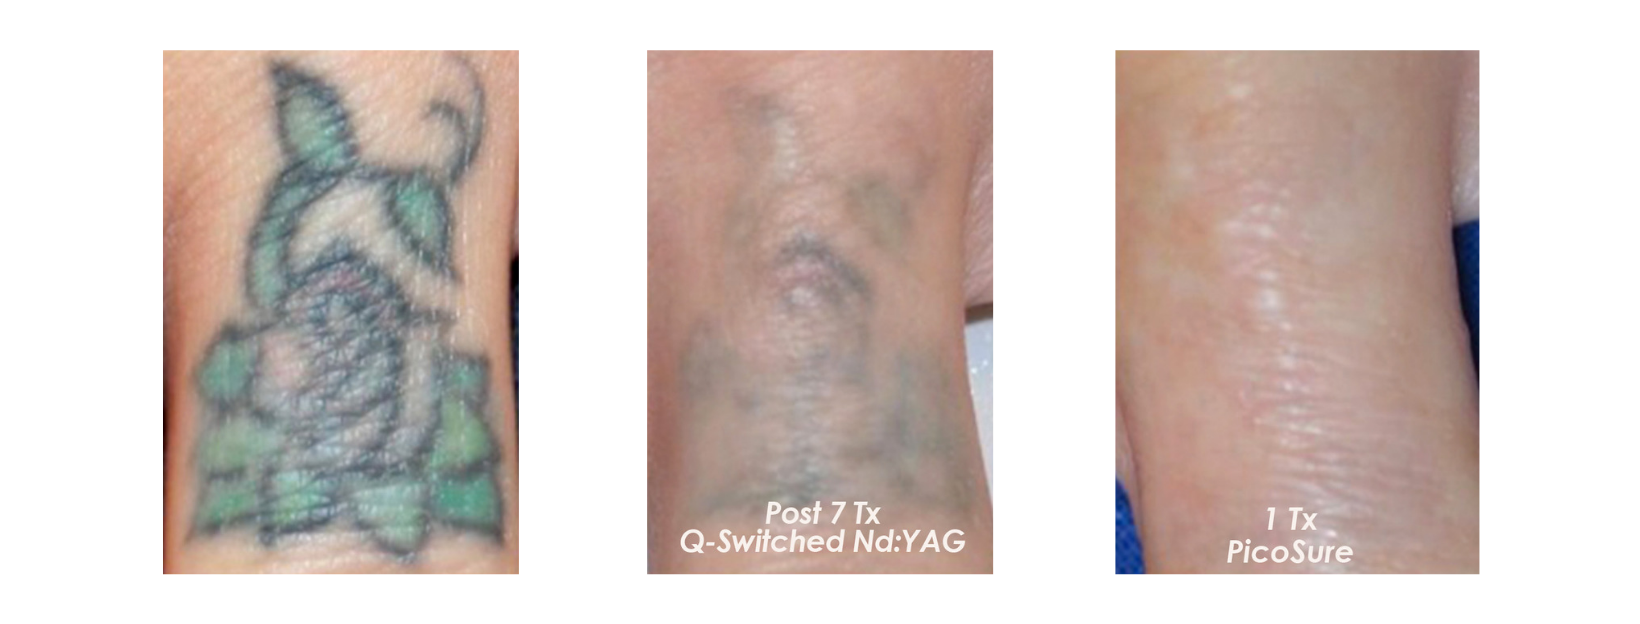 Tattoo Removal Coloured Green/Blue